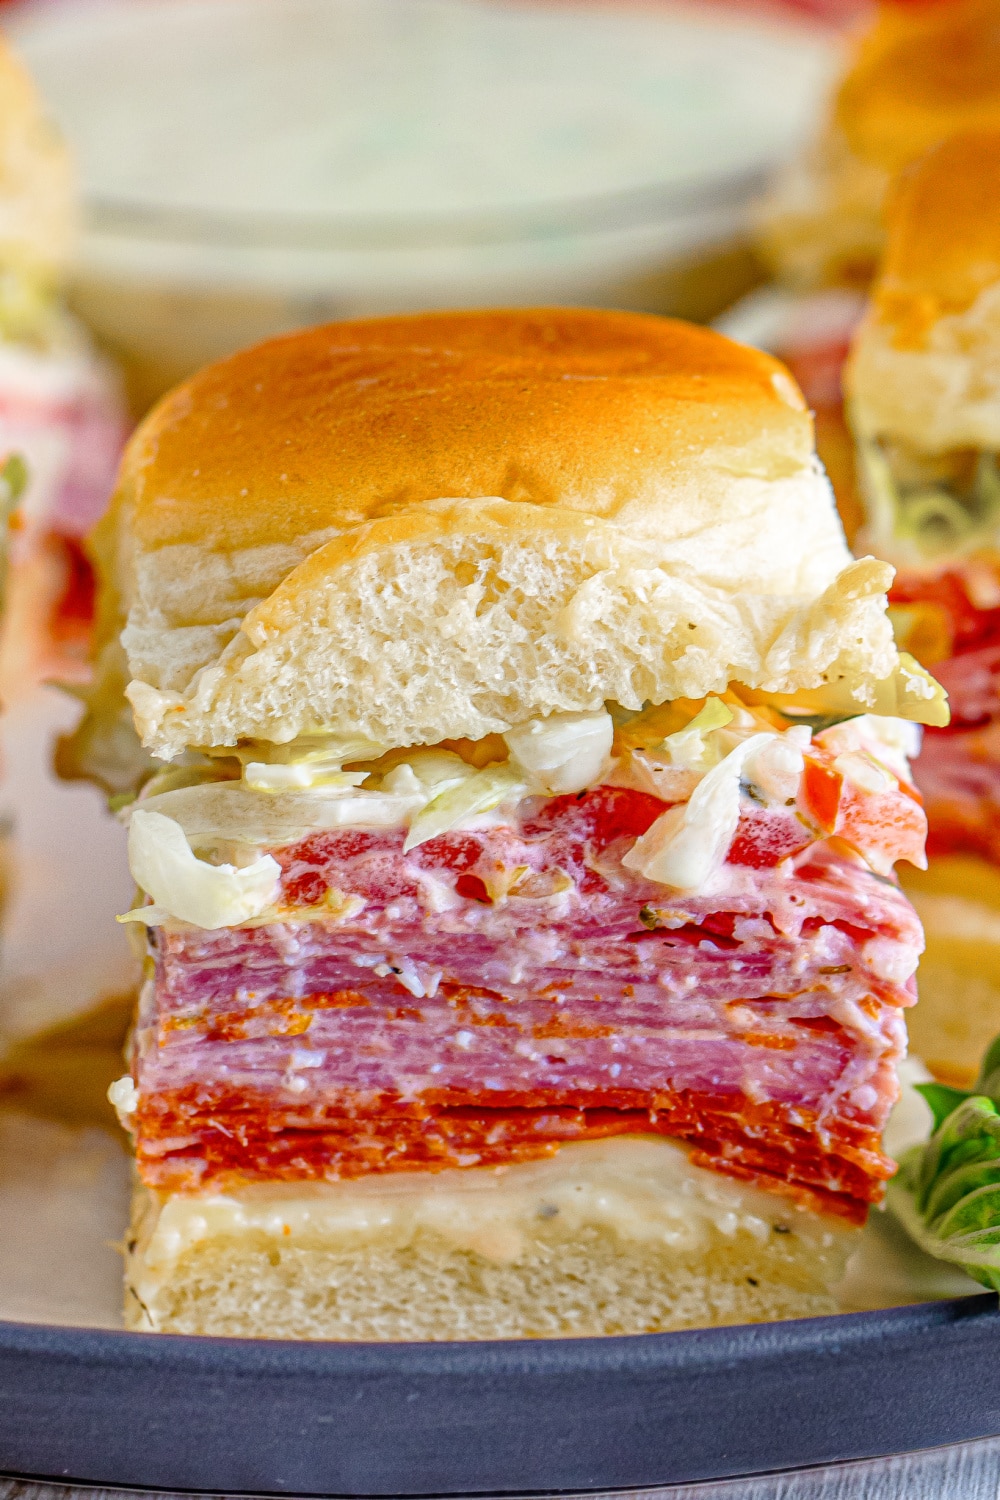 A single slider stacked high with deli meats and cheeses and sandwich sauce.